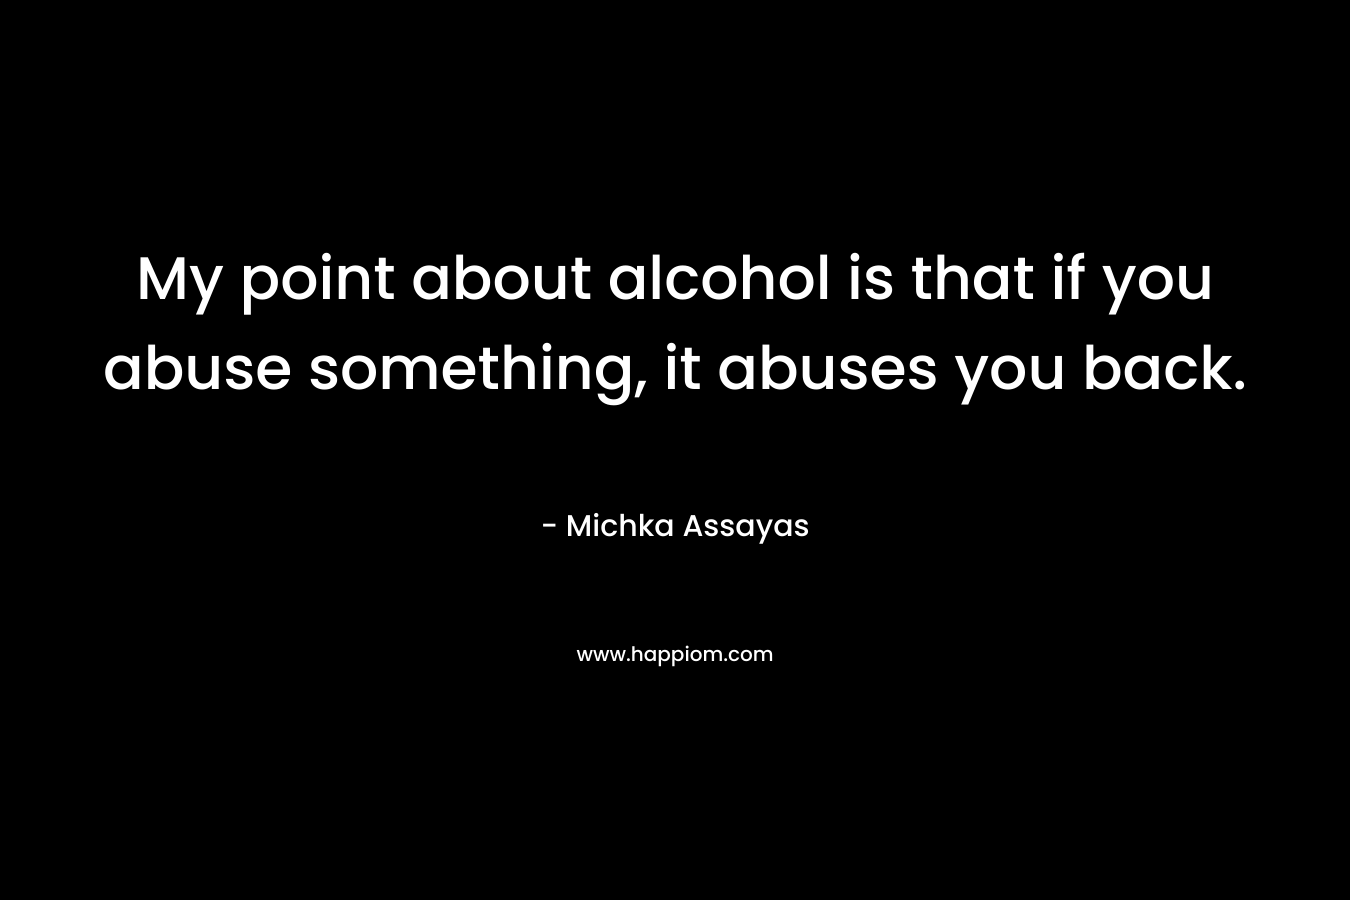 My point about alcohol is that if you abuse something, it abuses you back. – Michka Assayas